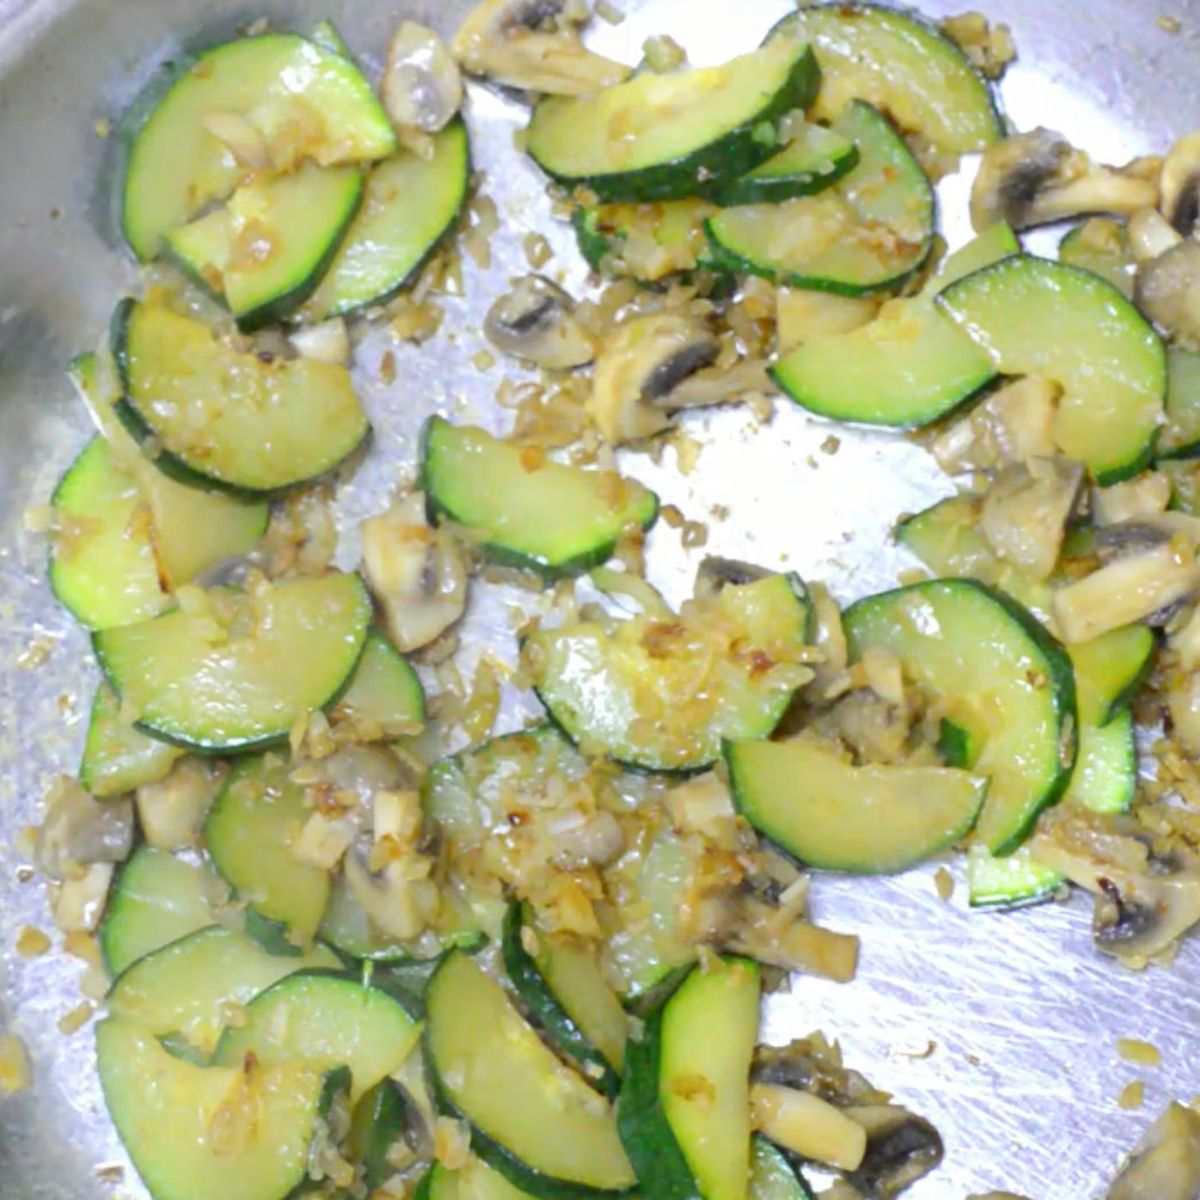 cooked zucchini and mushrooms in a steel pan.